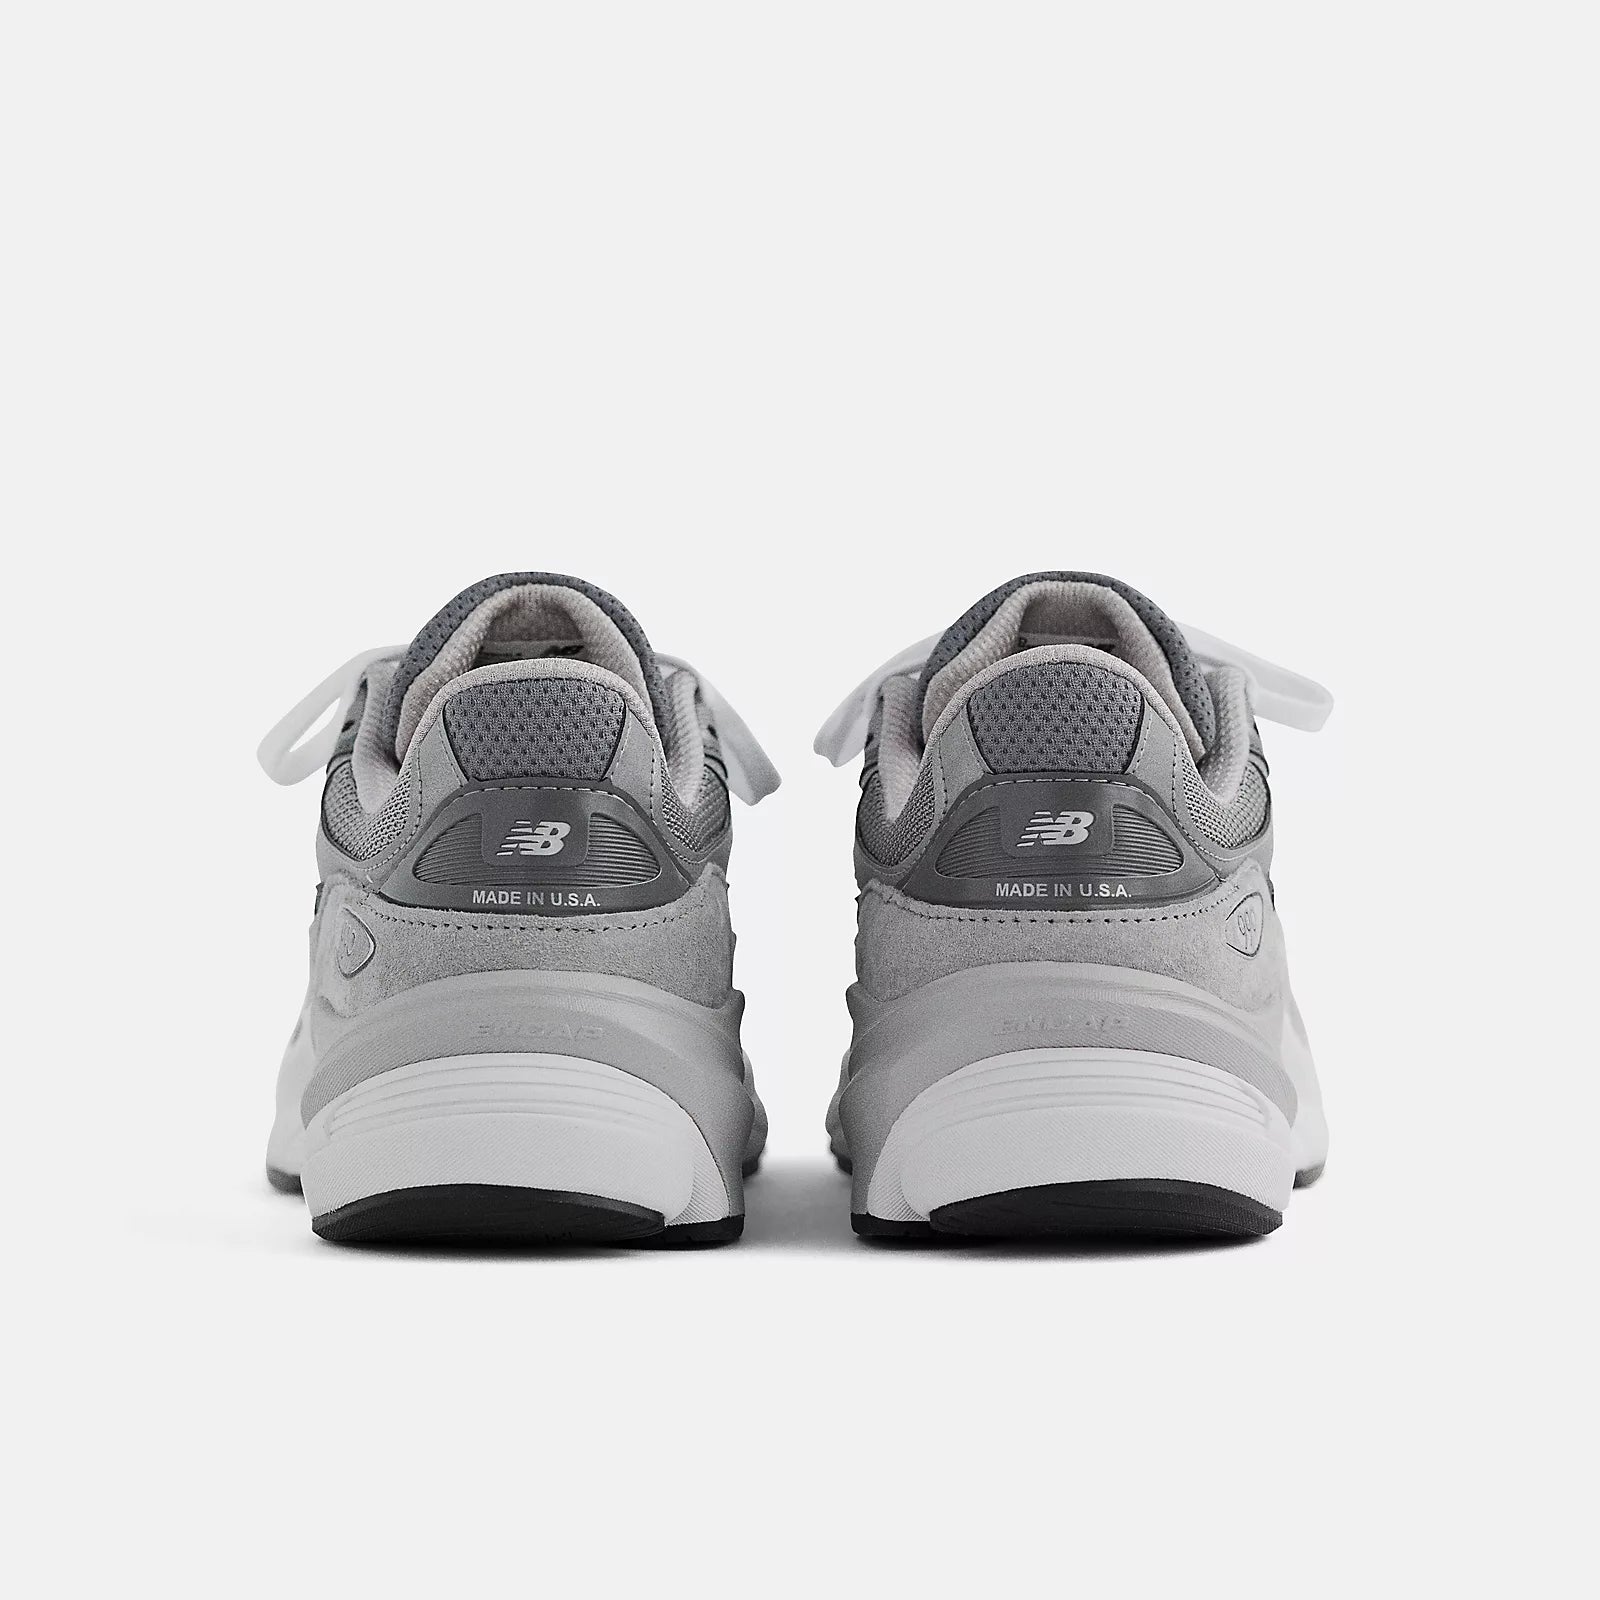 WMNS MADE IN USA 990V6 - GREY